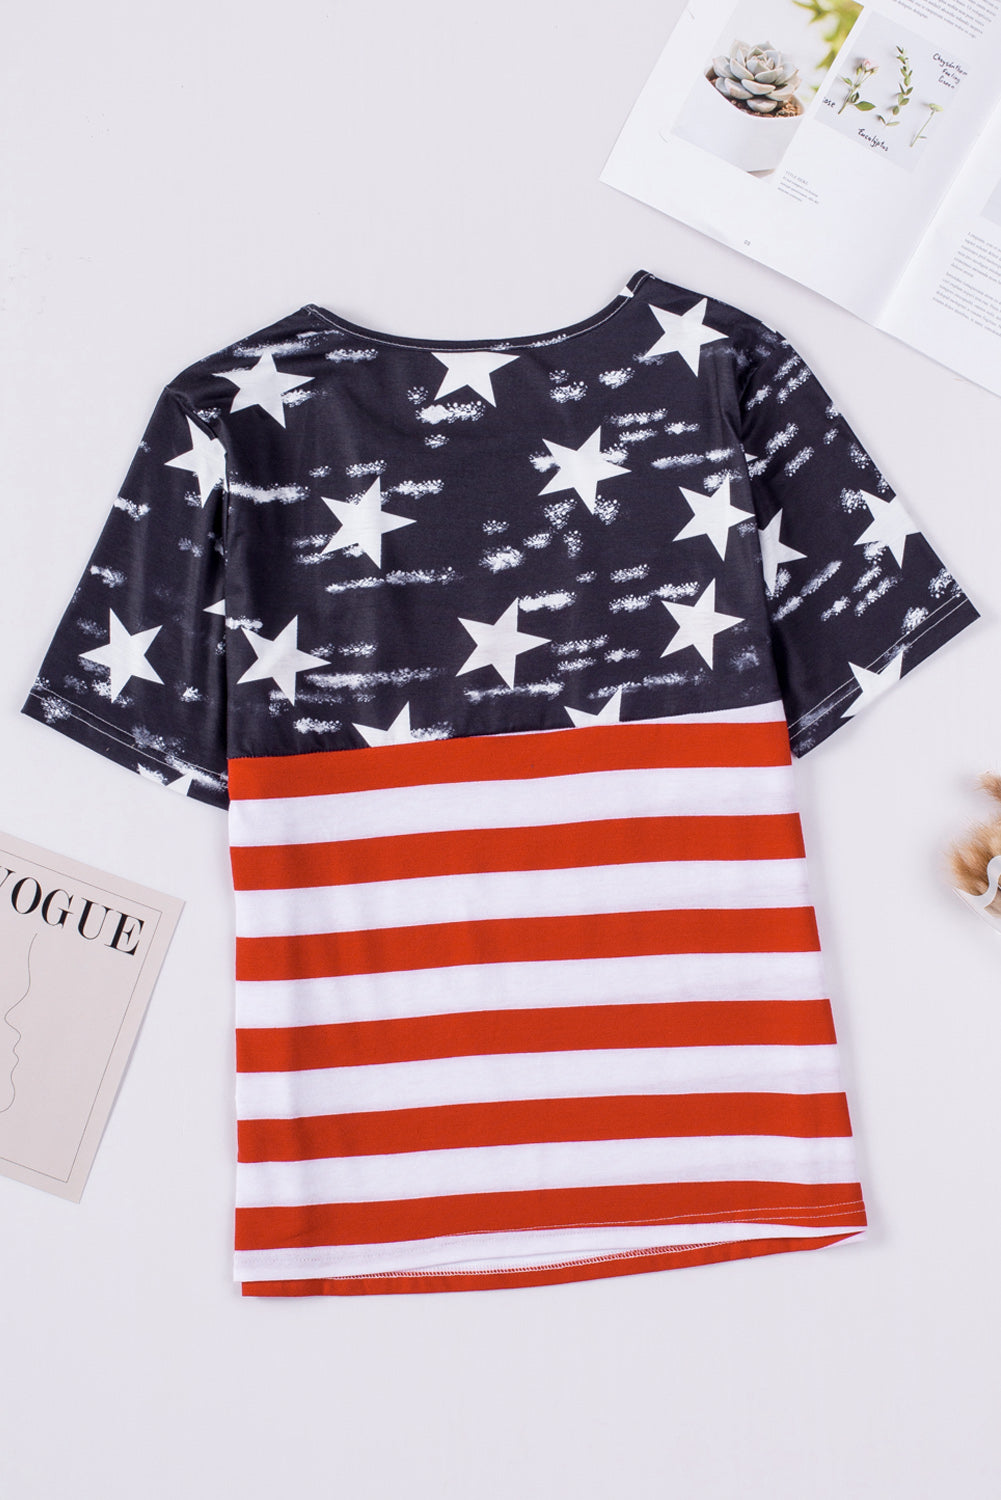 American Flag Cut Out Short Sleeve Crew Neck T Shirt